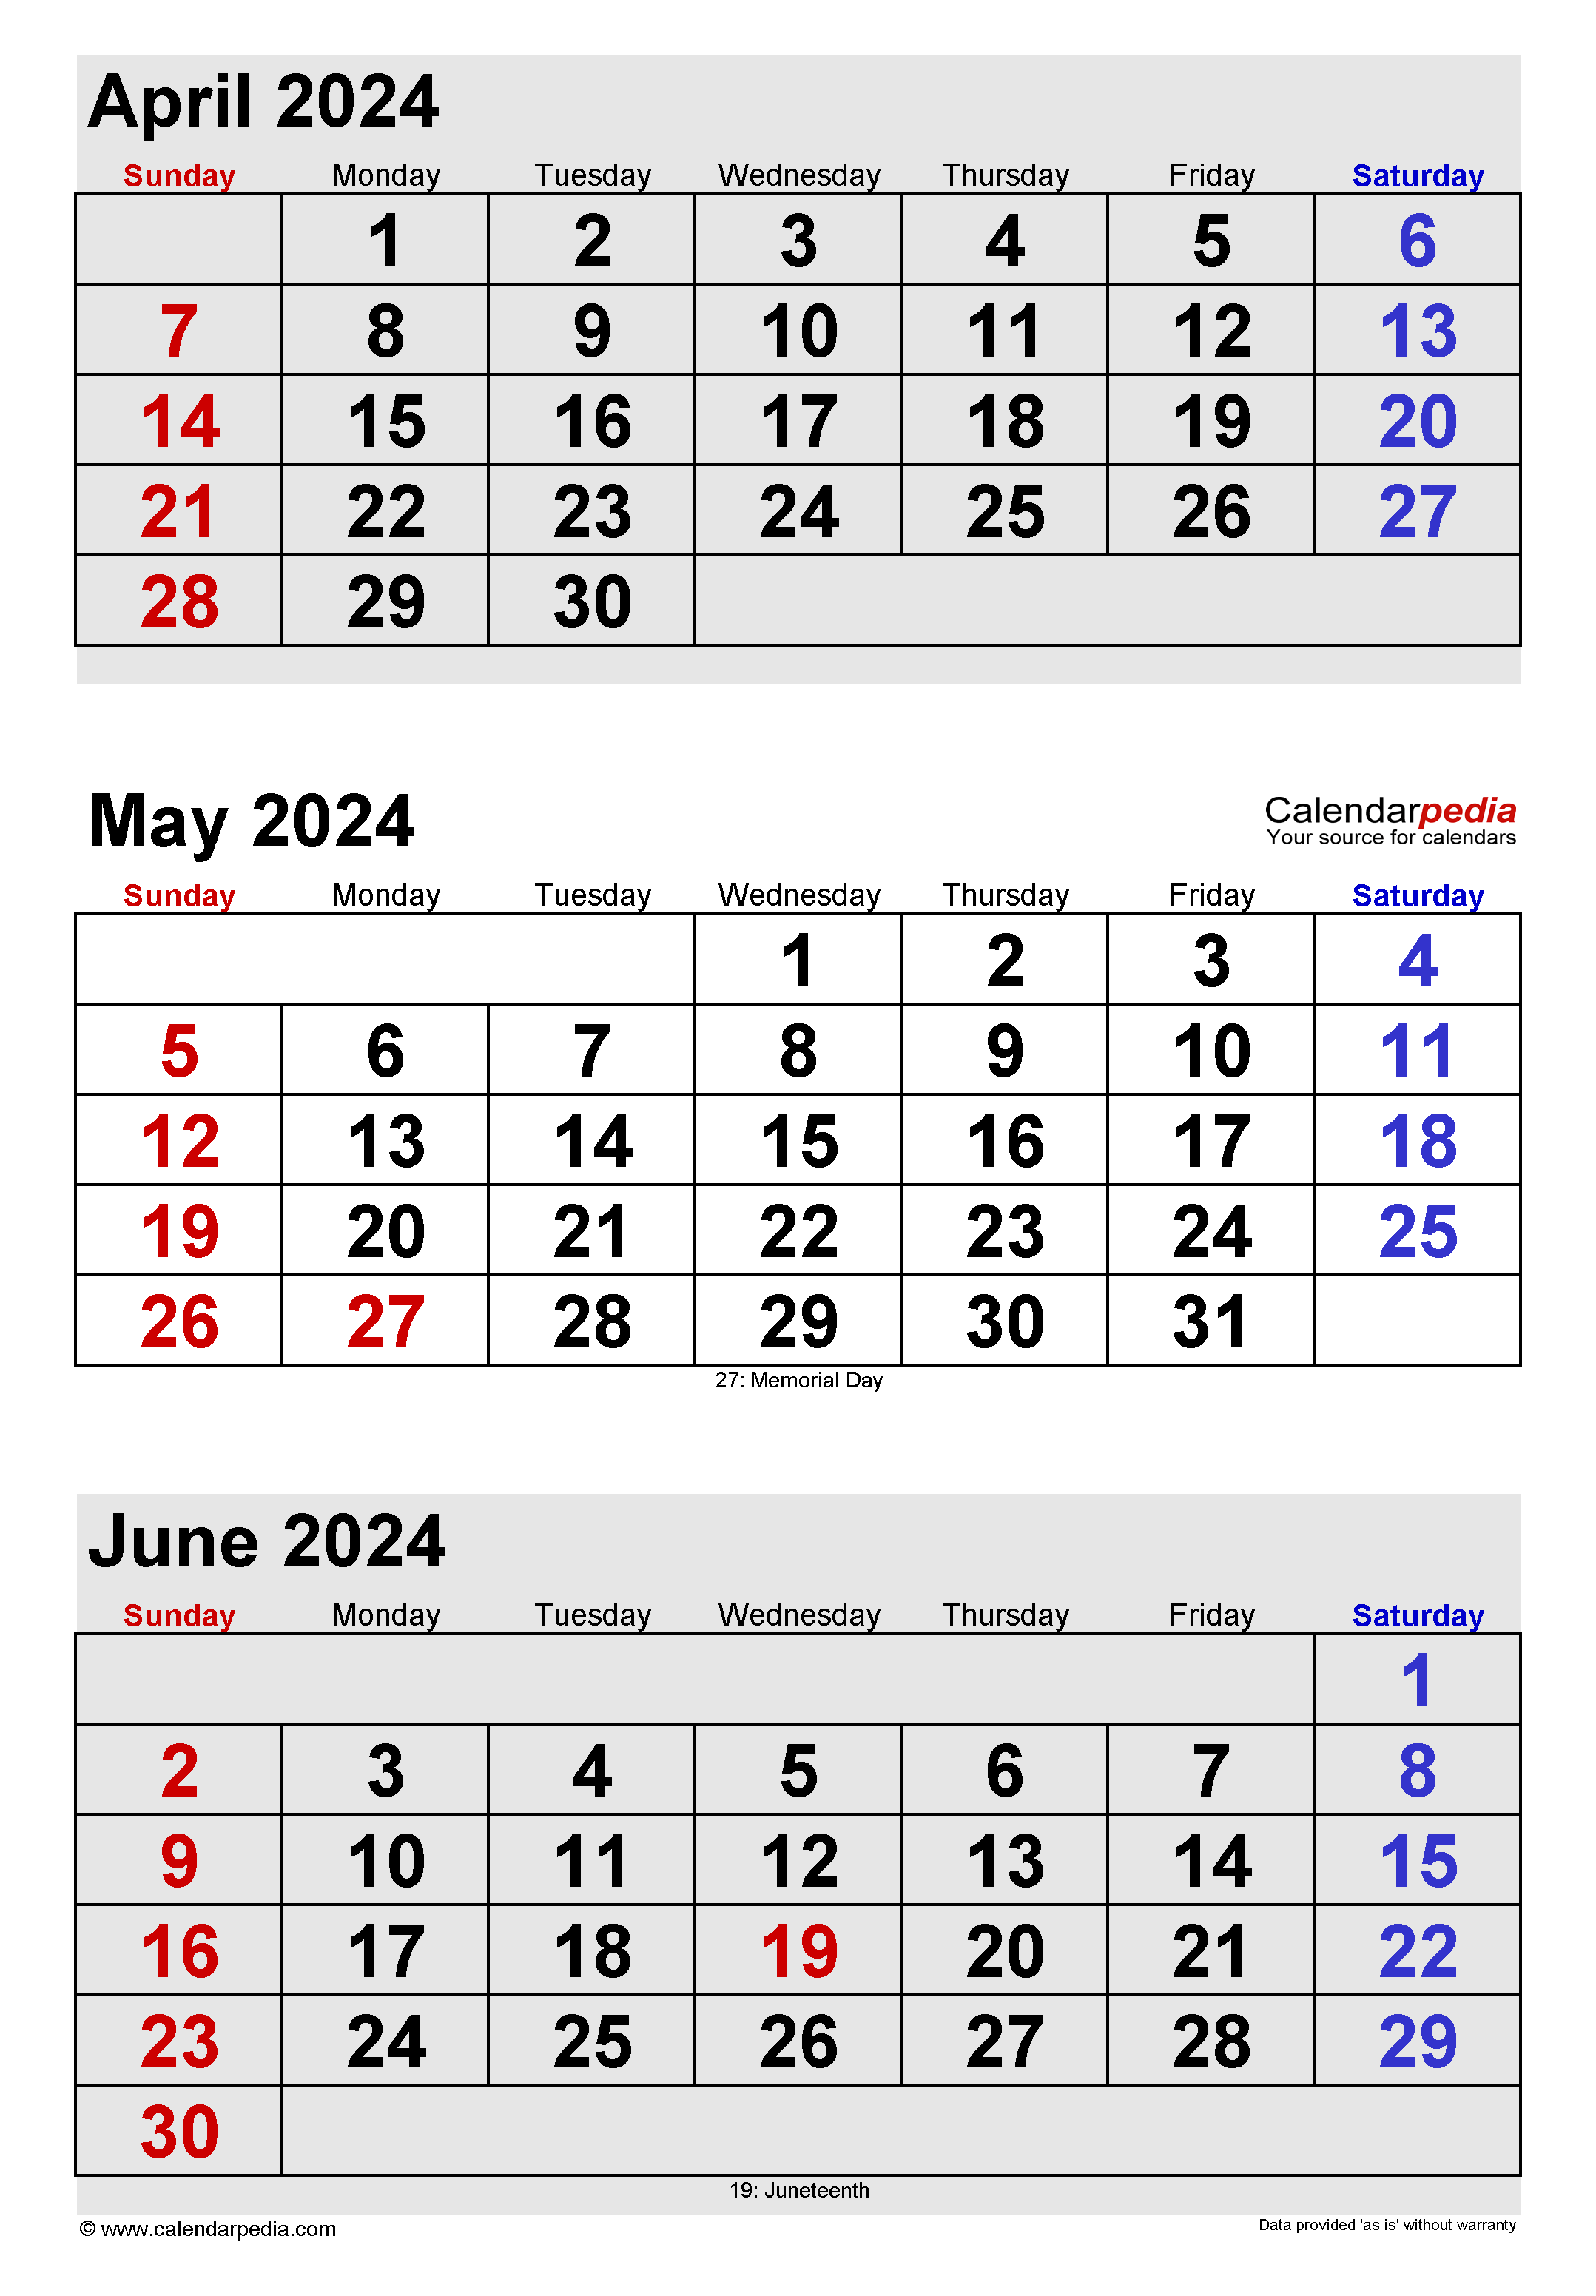 May 2024 Calendar | Templates For Word, Excel And Pdf intended for Calendar For April And May 2024